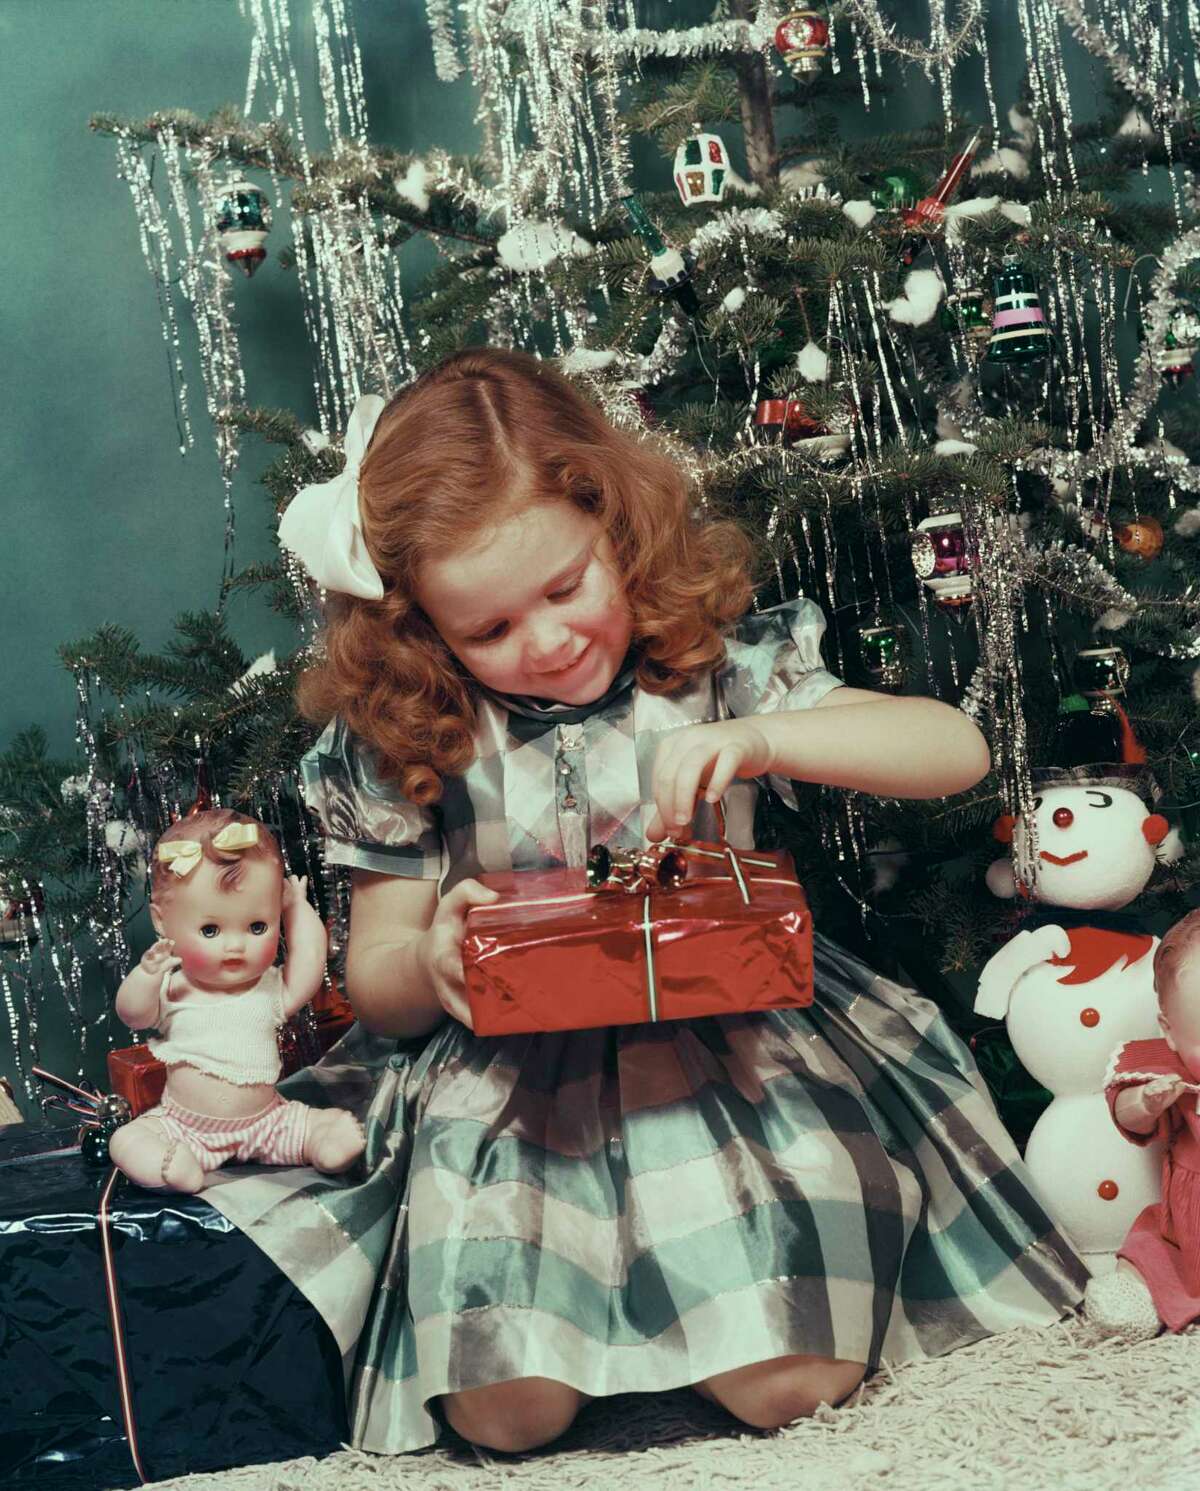 1950s: Photos from this decade surprisingly scrawny trees draped with plenty of tinsel.